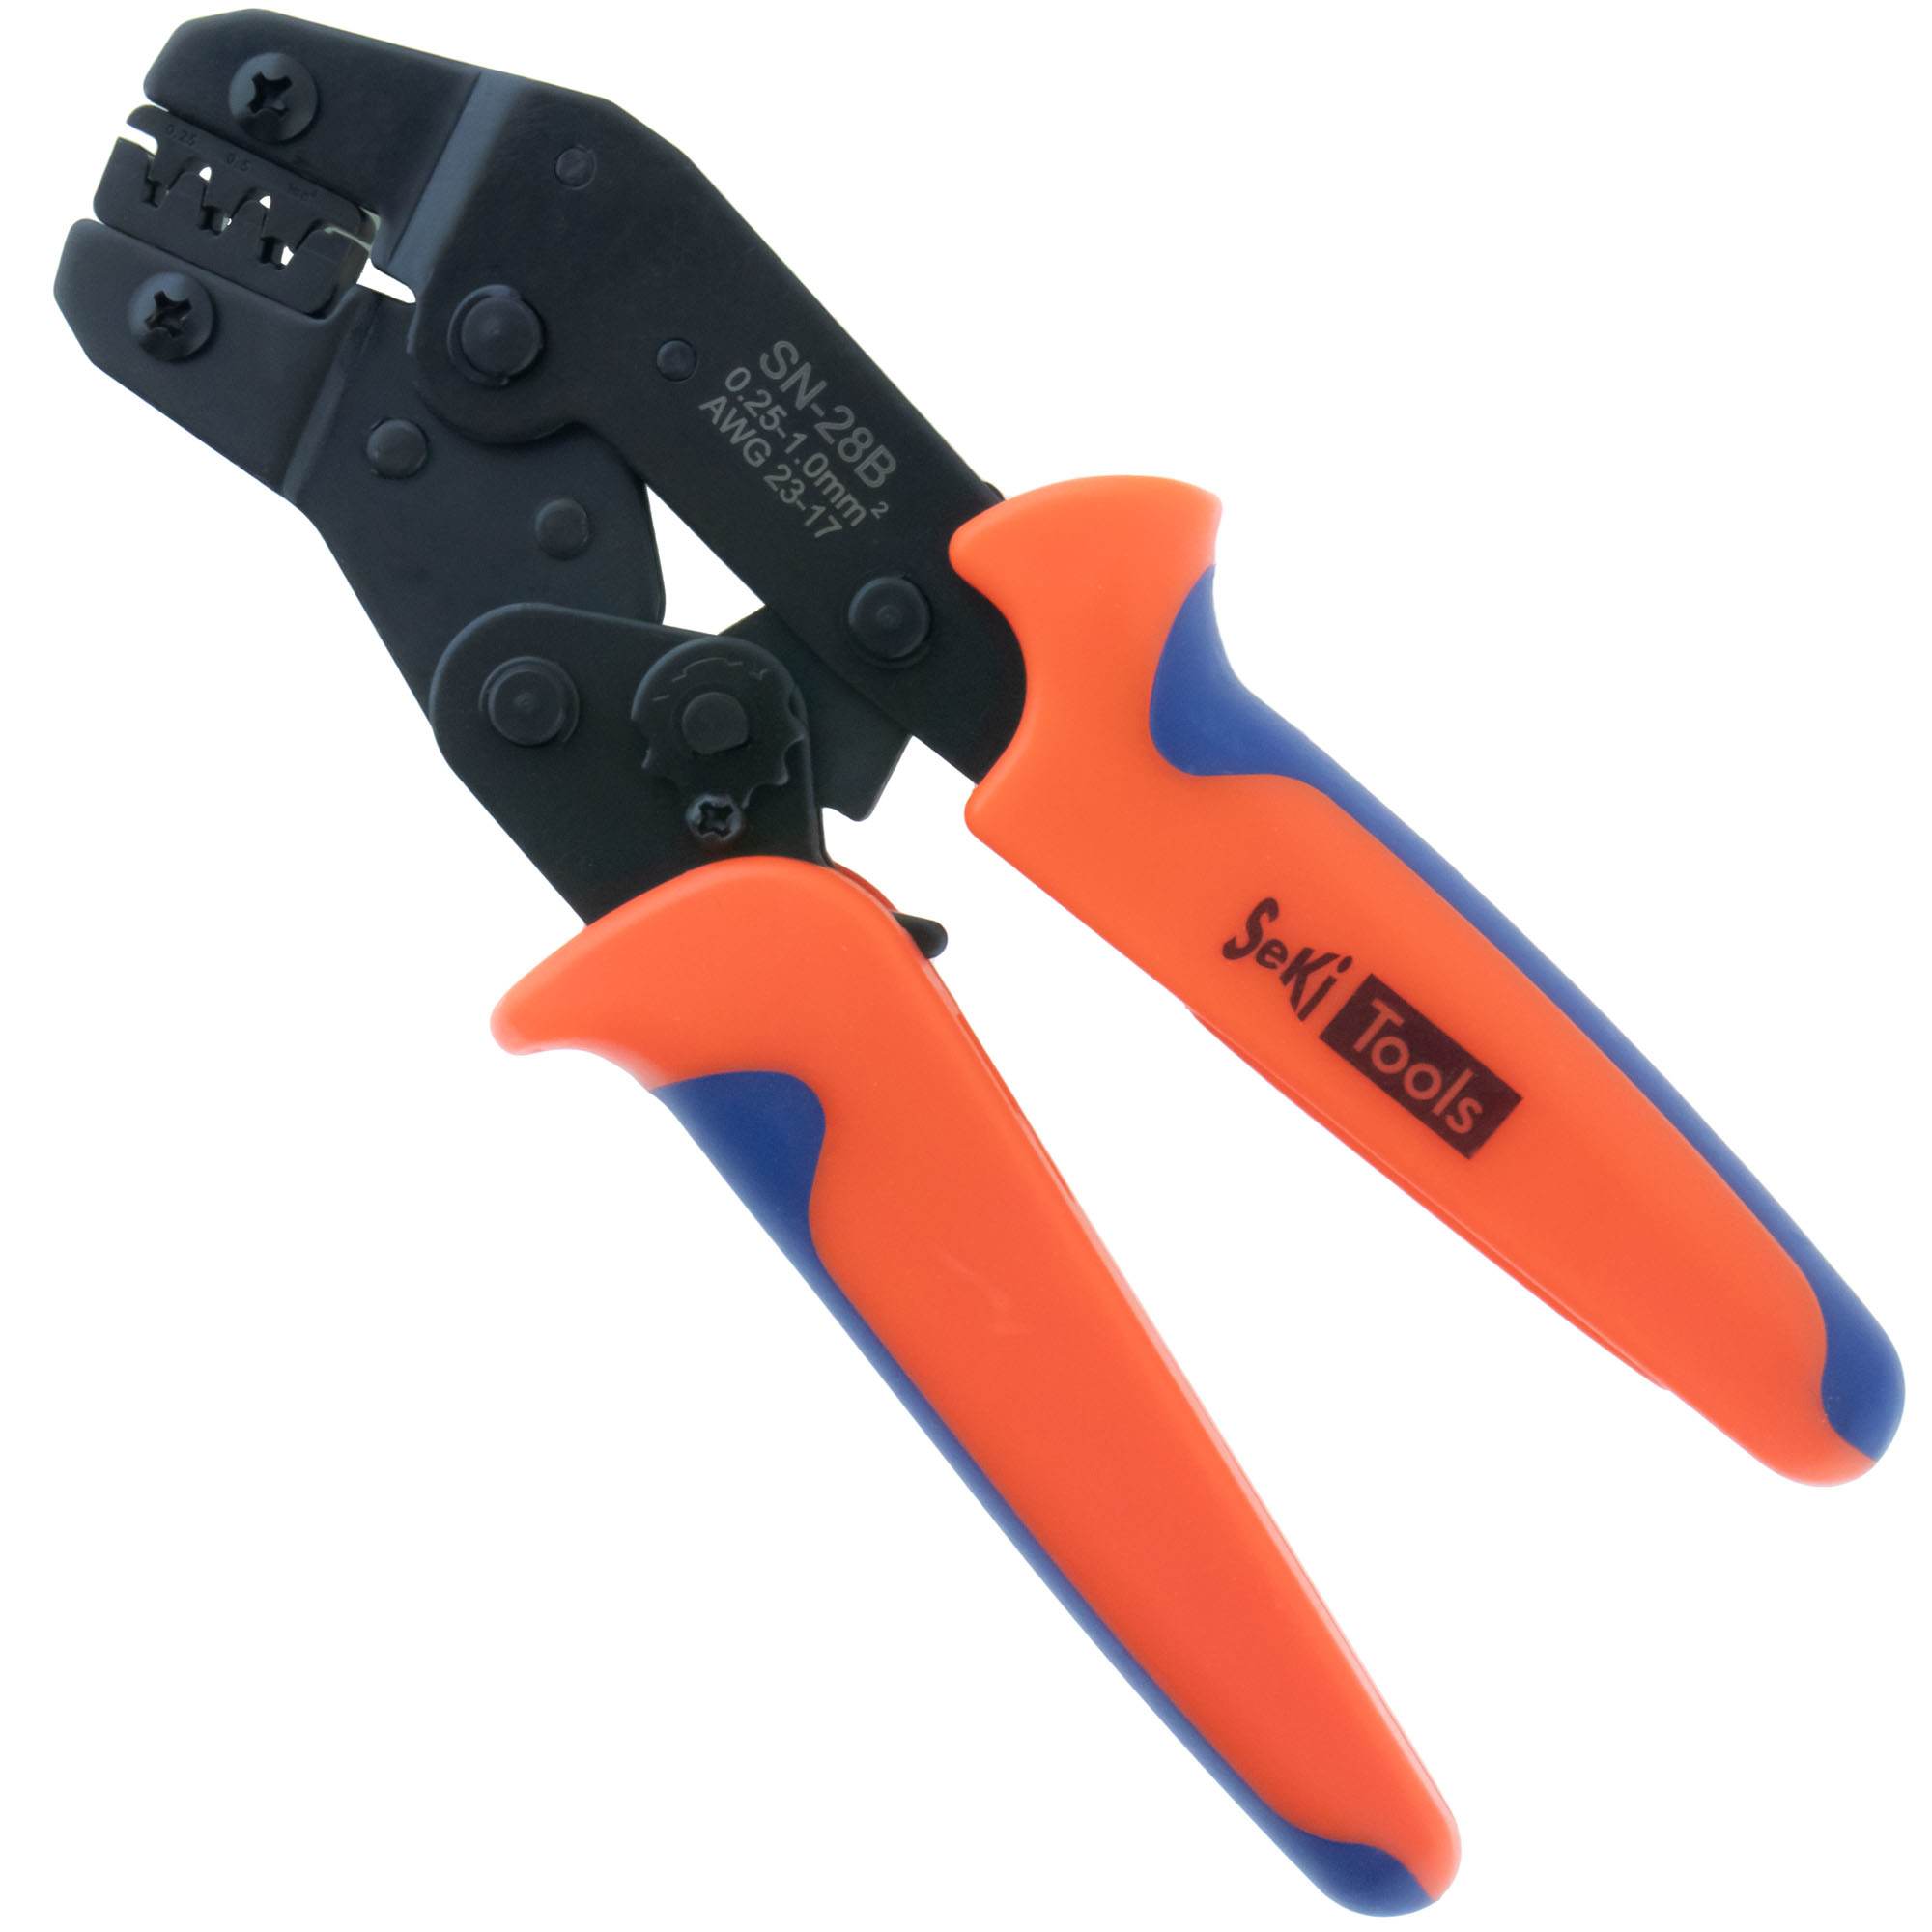 Crimping tool for Dupont-Terminals 0,25-1,0mm²